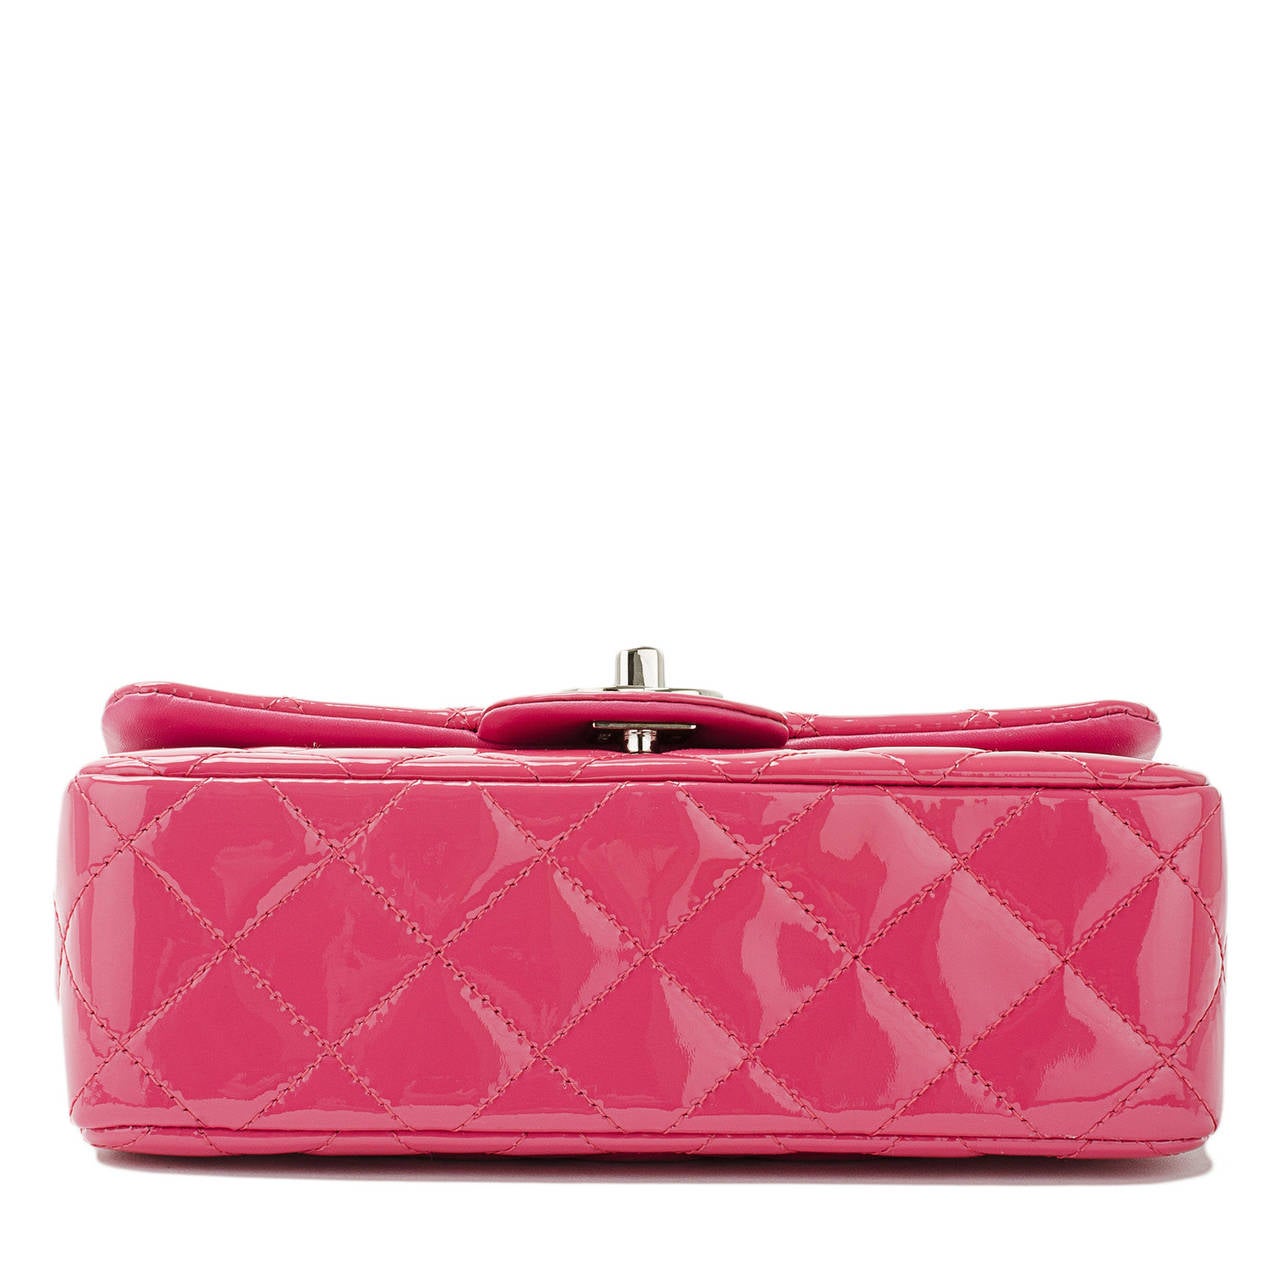 Women's Chanel Fuchsia Pink Quilted Patent Small Classic Flap Bag